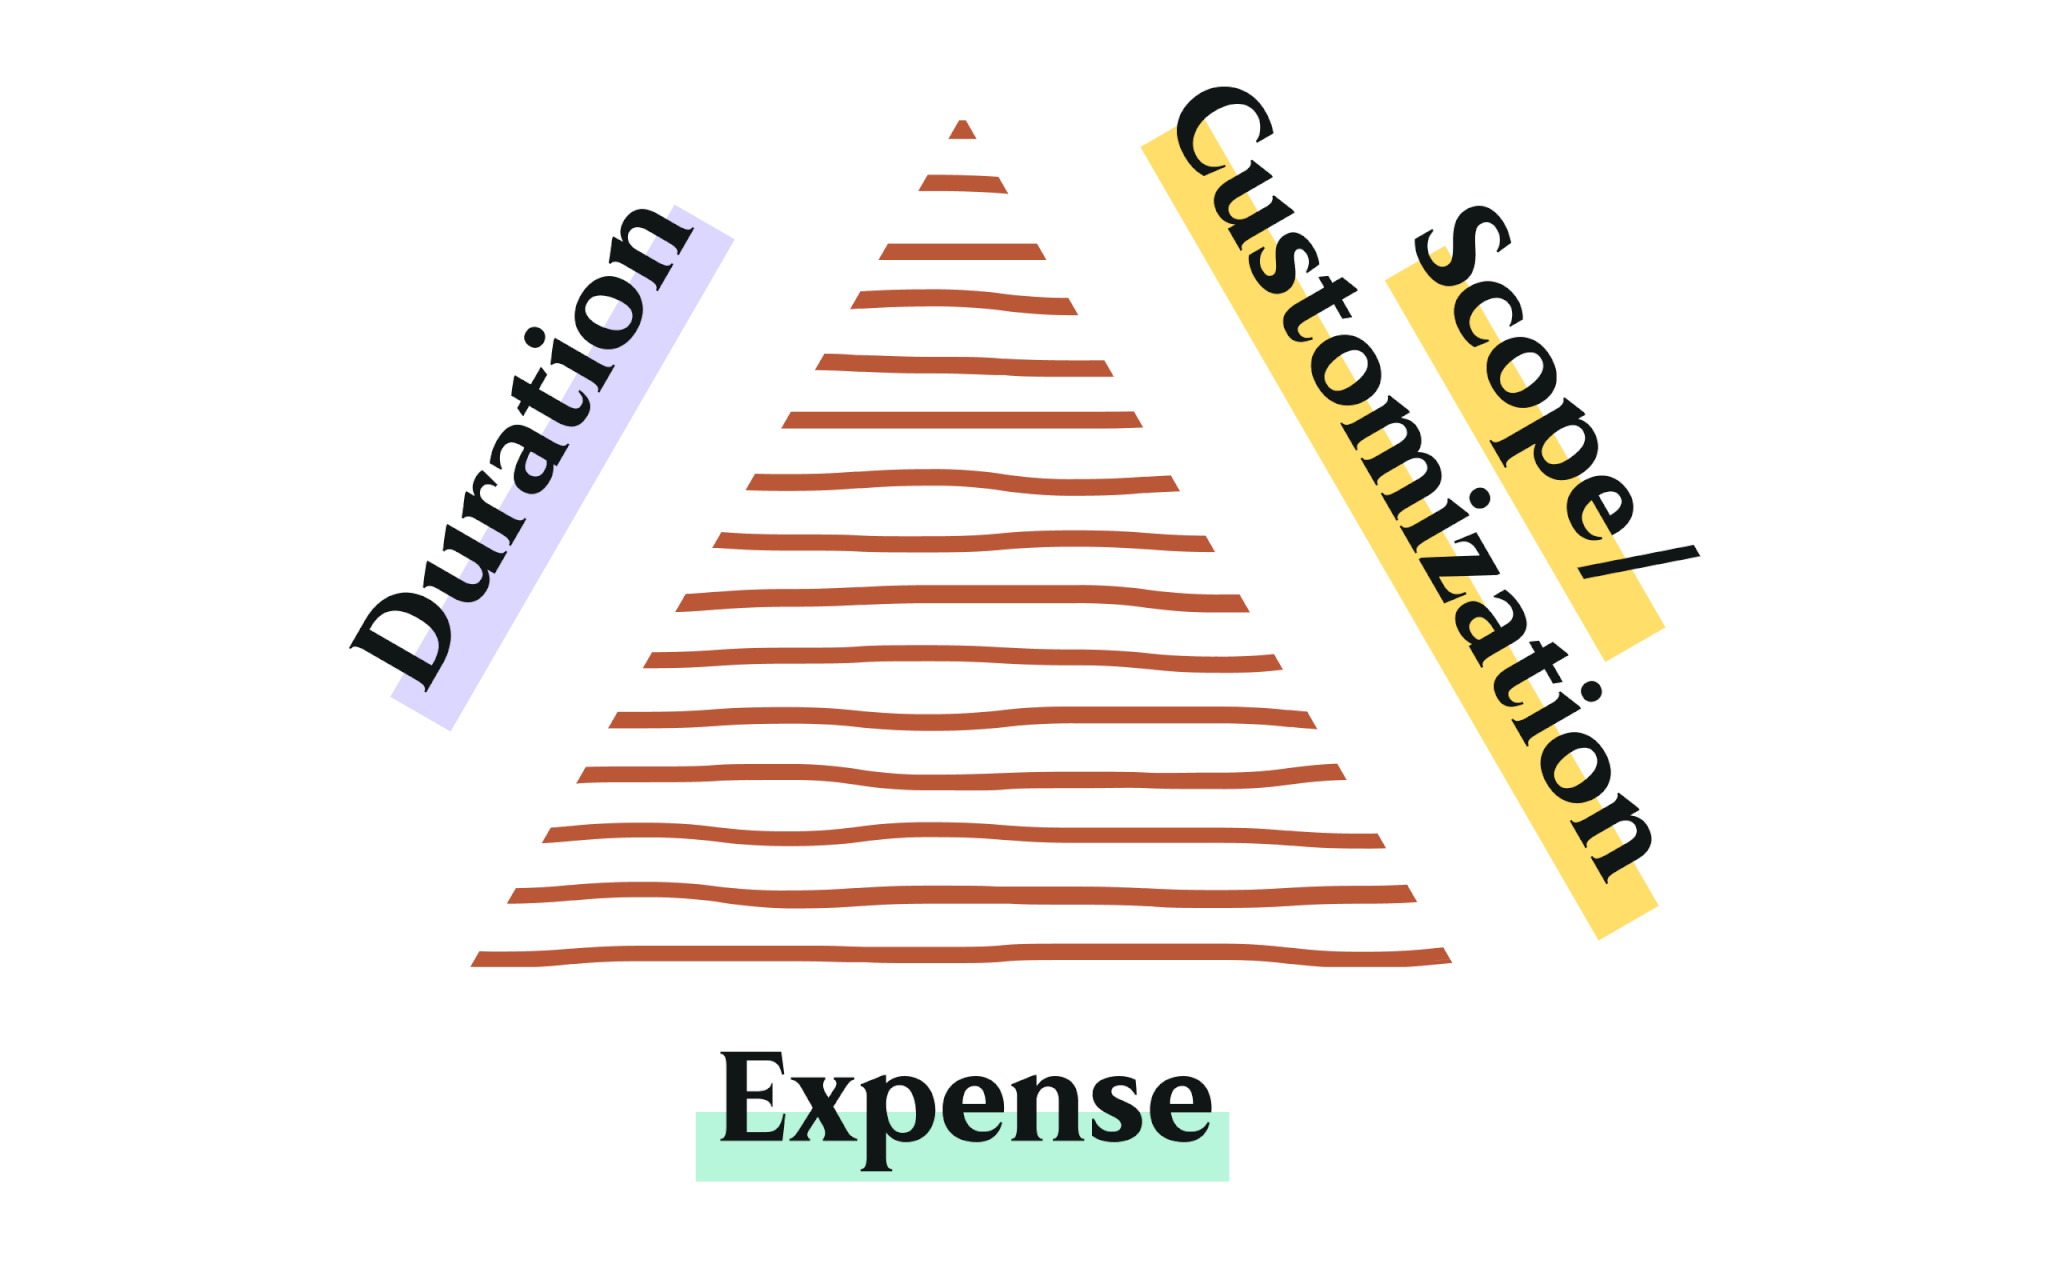 graphic of a triangle with colored text on each side; one side reads duration, one reads scope/customization, and the last reads expense.